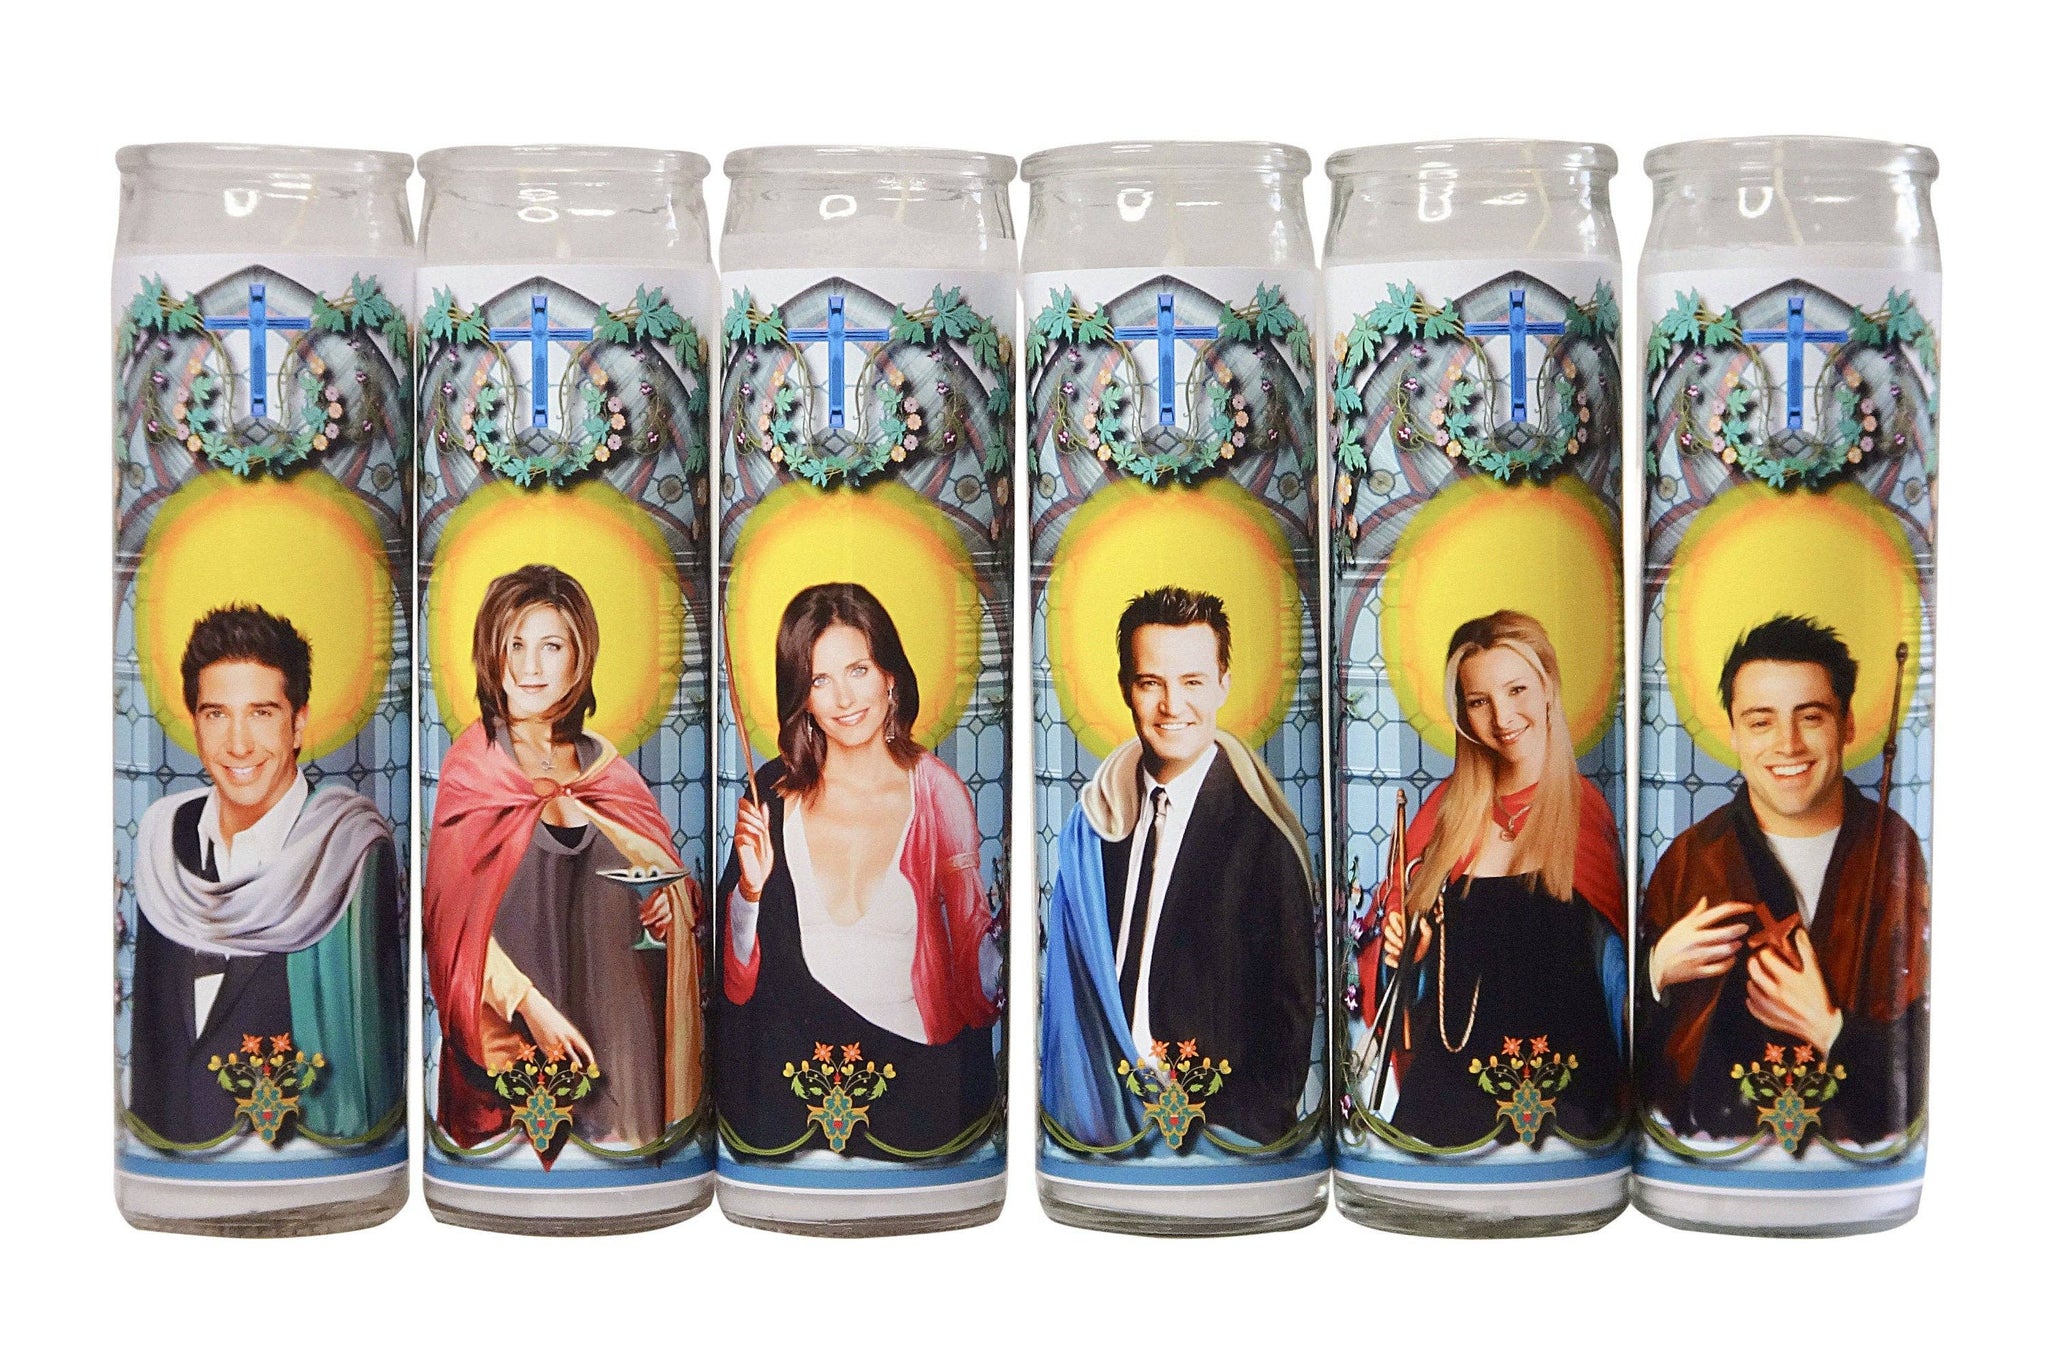 Perfect gift for Friends fans. Friends prayer candle set.